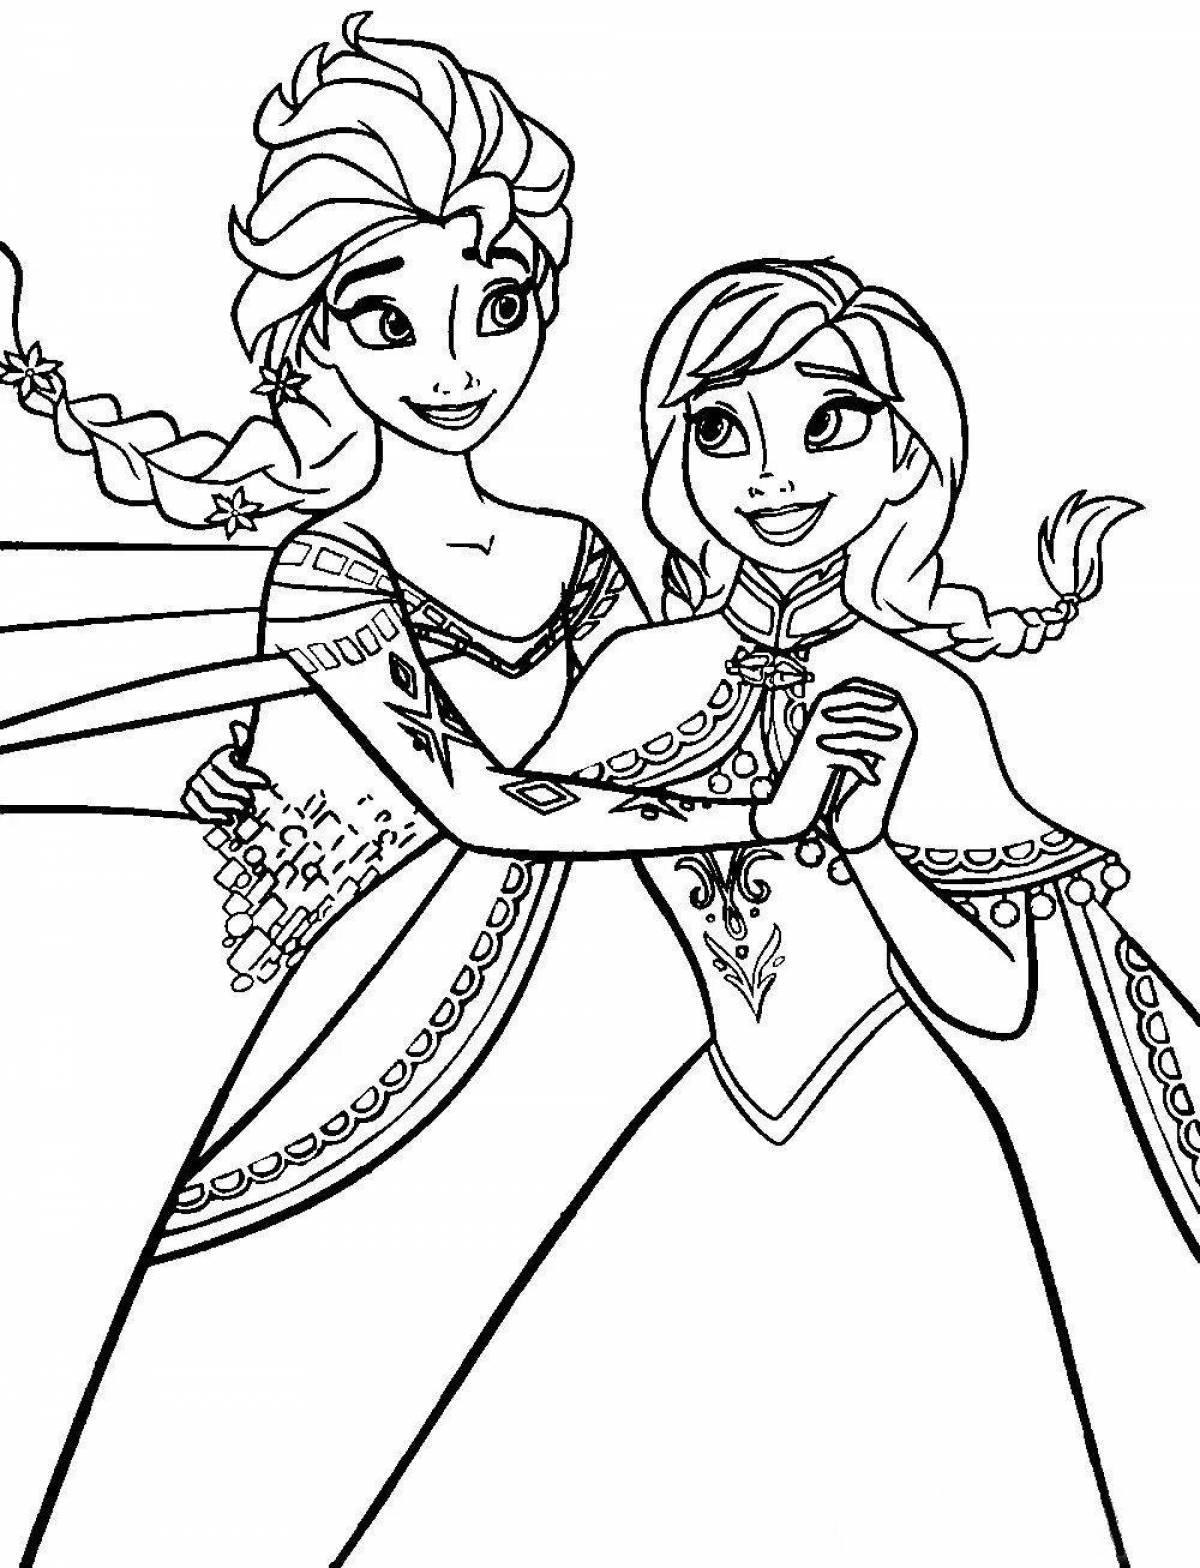 Majestic coloring page drawing of elsa